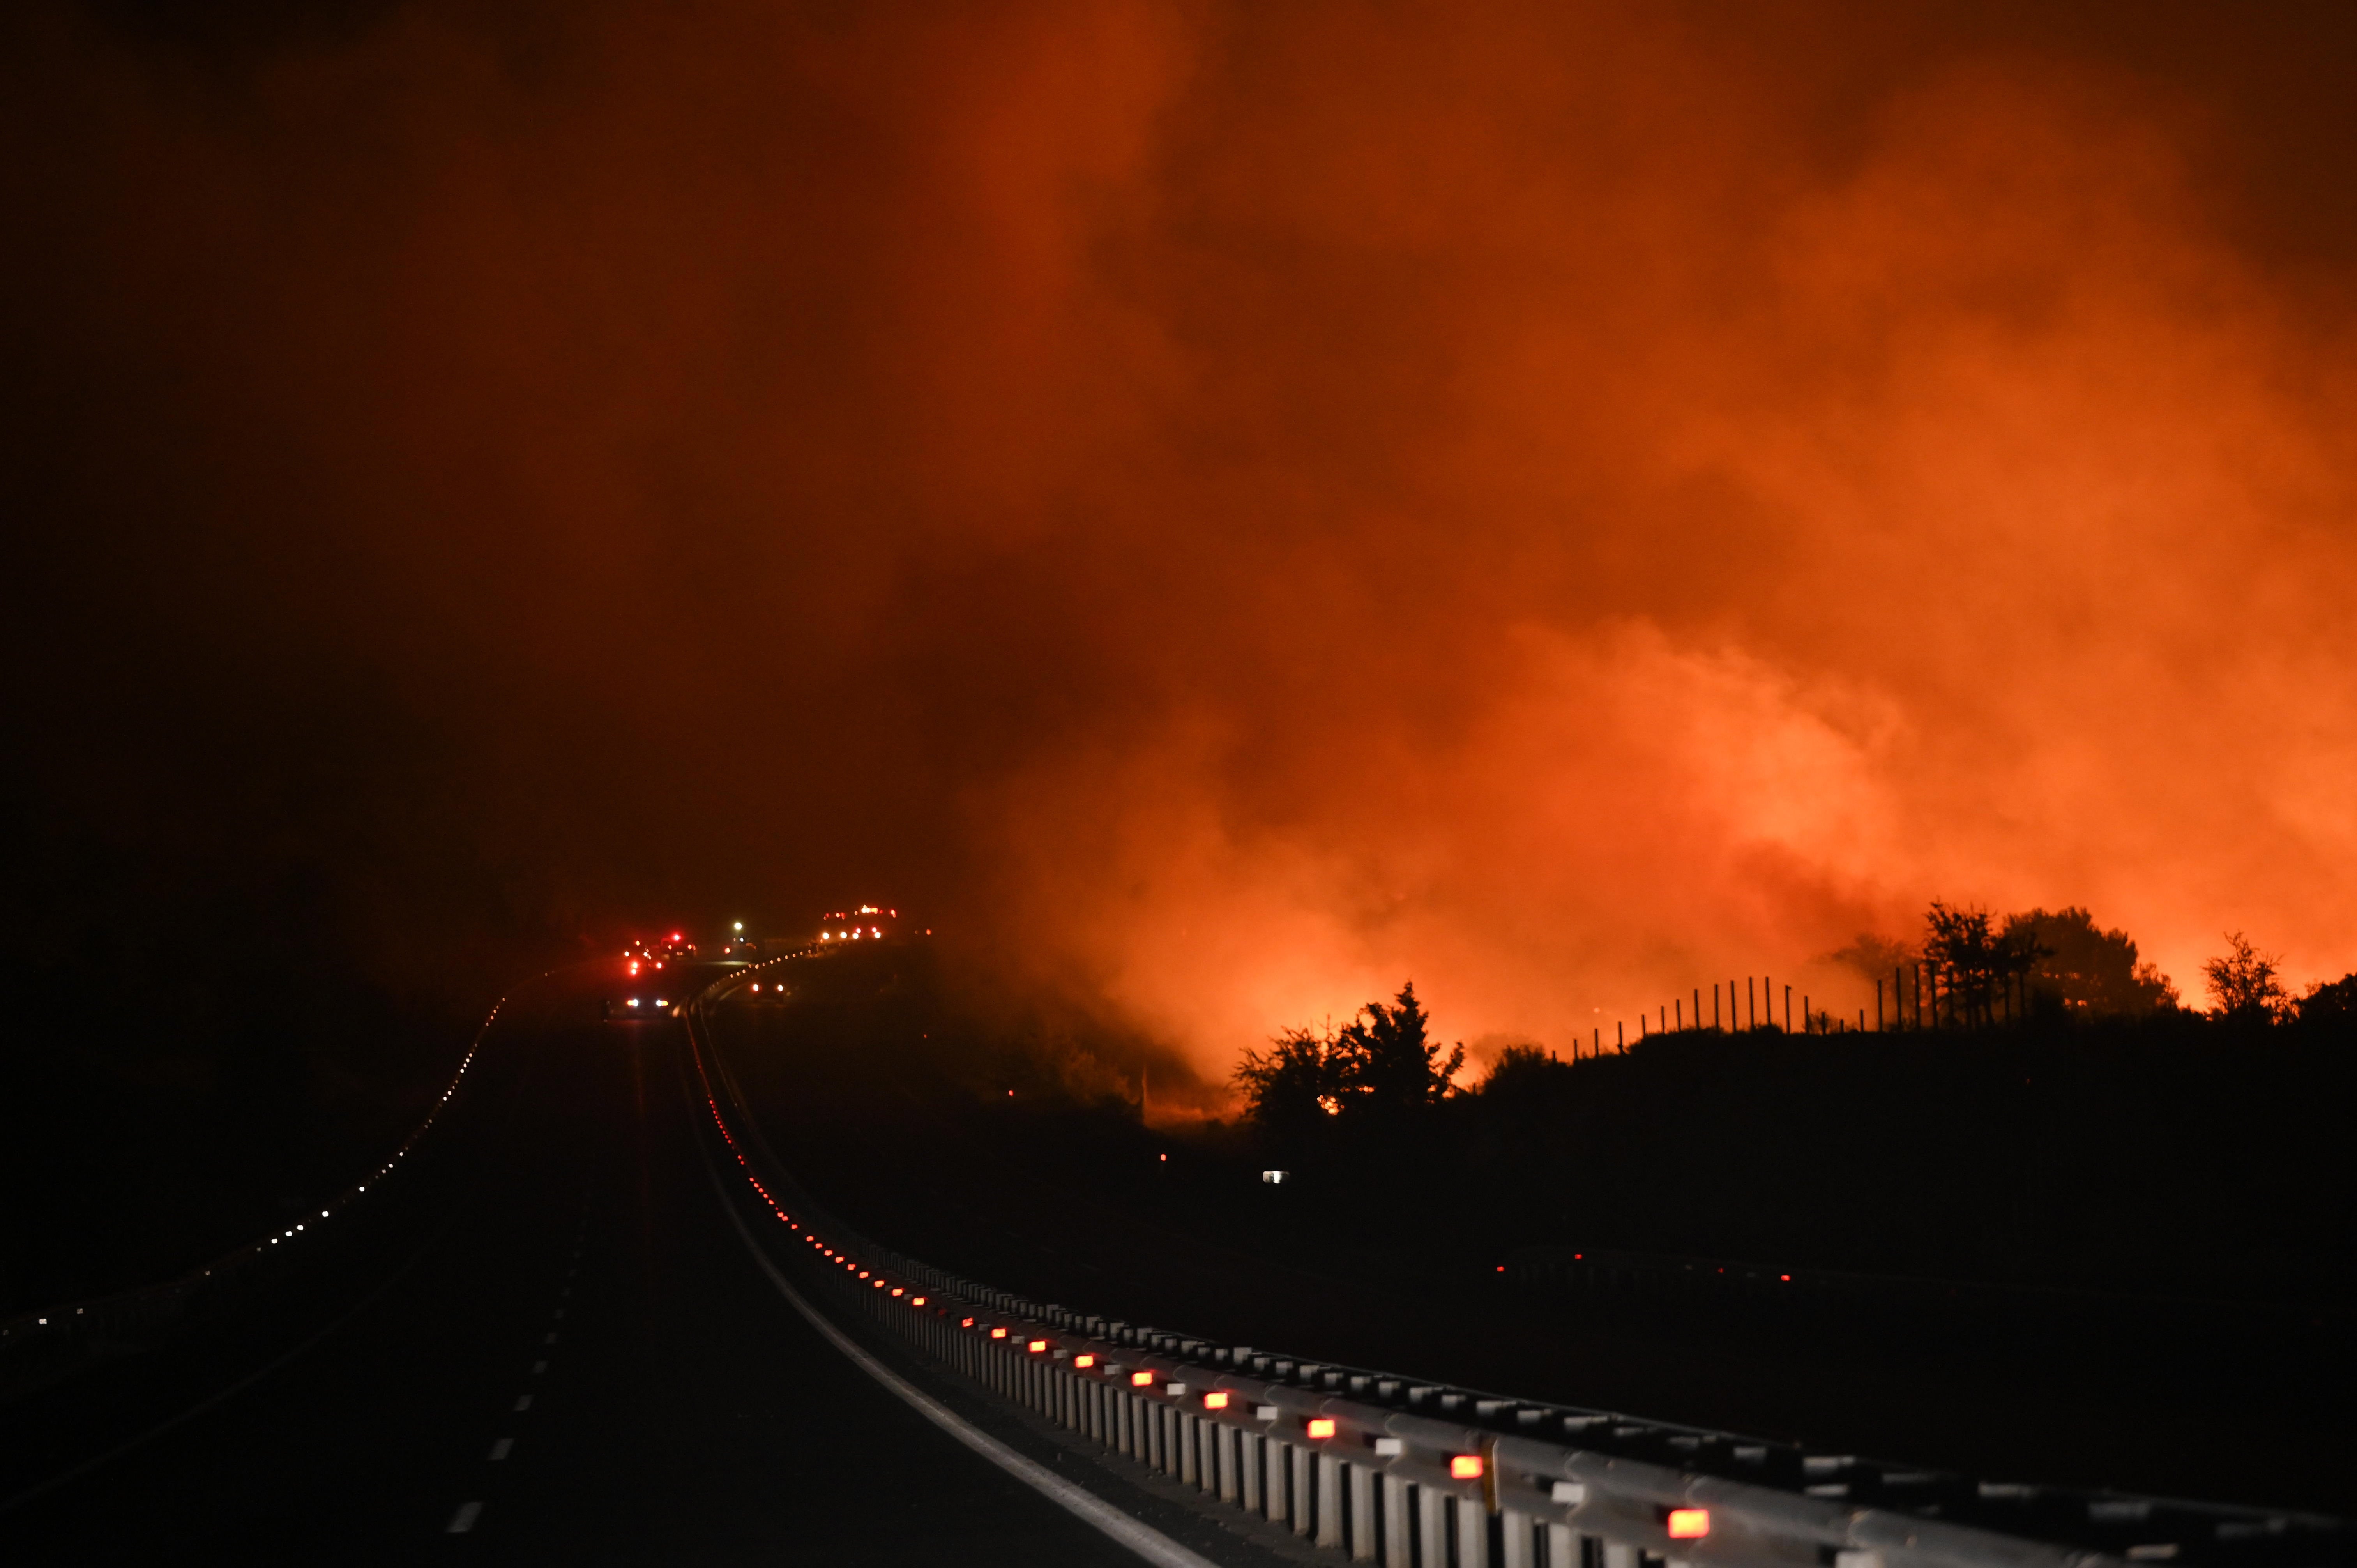 Fire brigades have been battling raging wildfires in Alexandroupolis